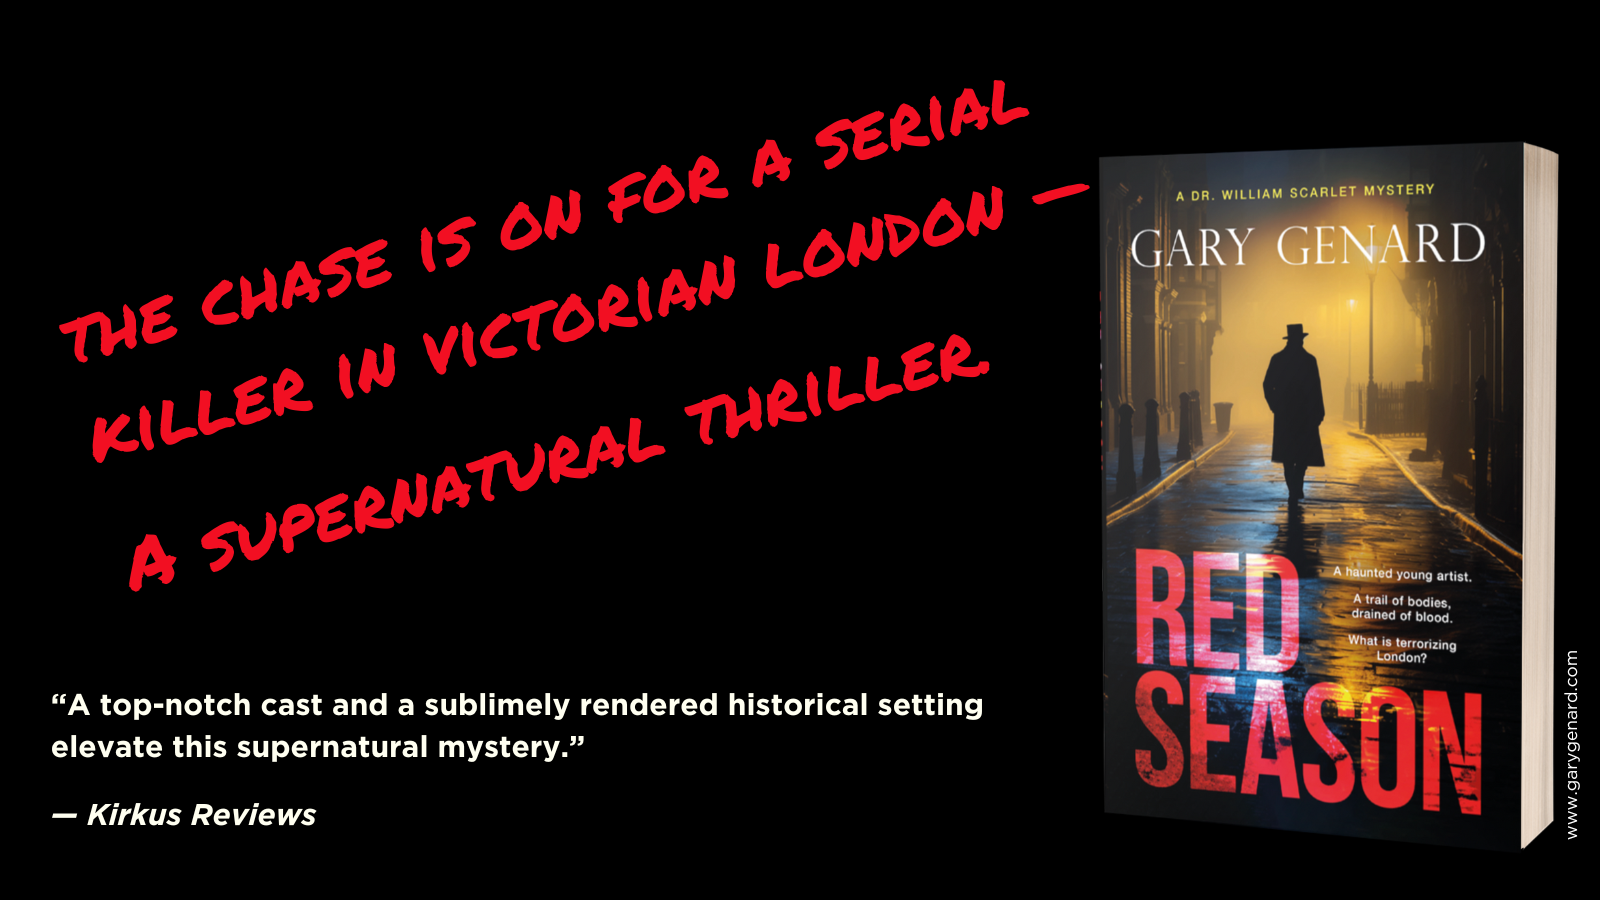 Red Season, an historical mystery featuring psychic detective Dr. William Scarlet and a serial killer, by Gary Genard.